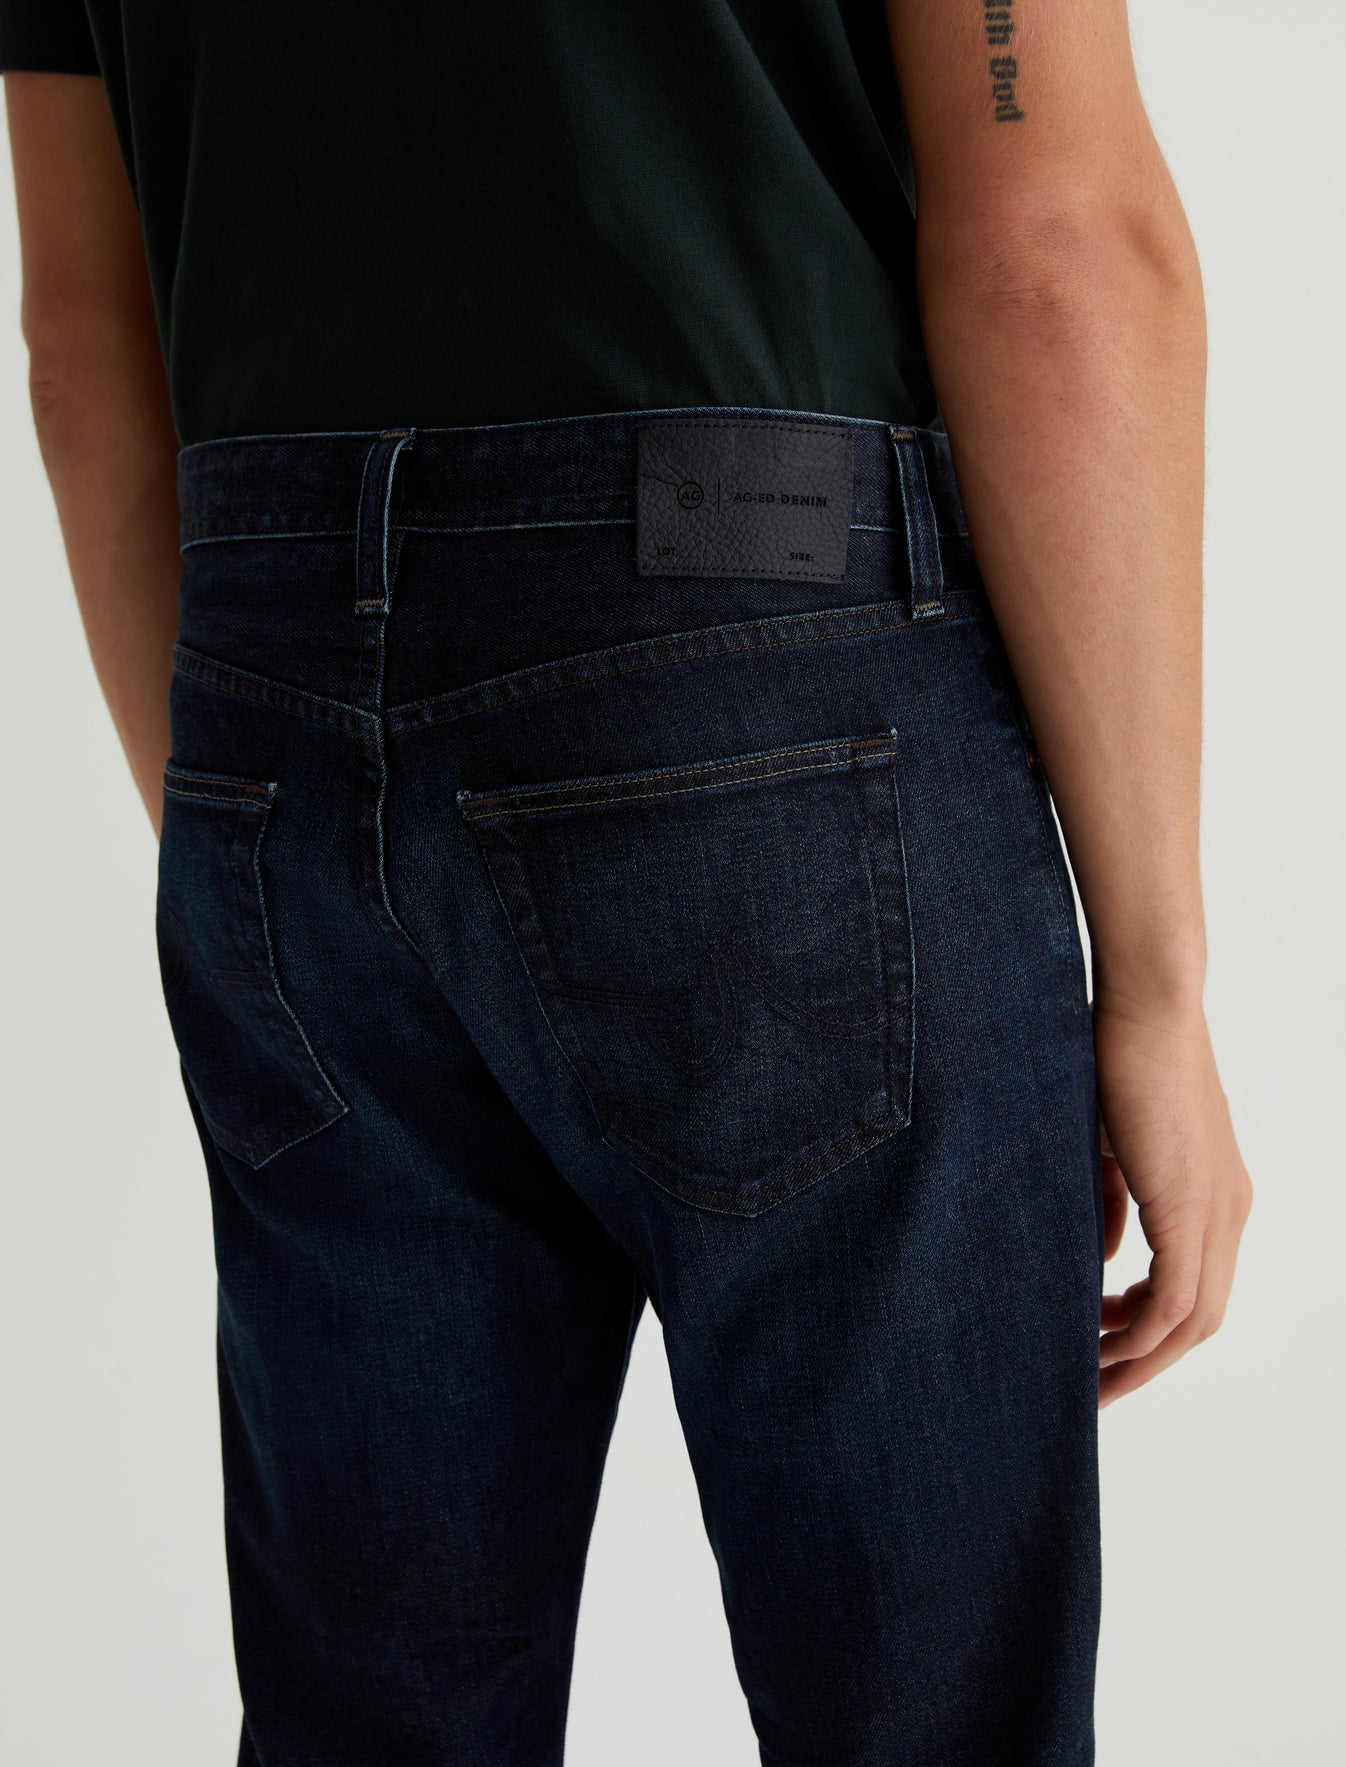 at Holzer Years Everett Official Store Mens 3 Jeans AG